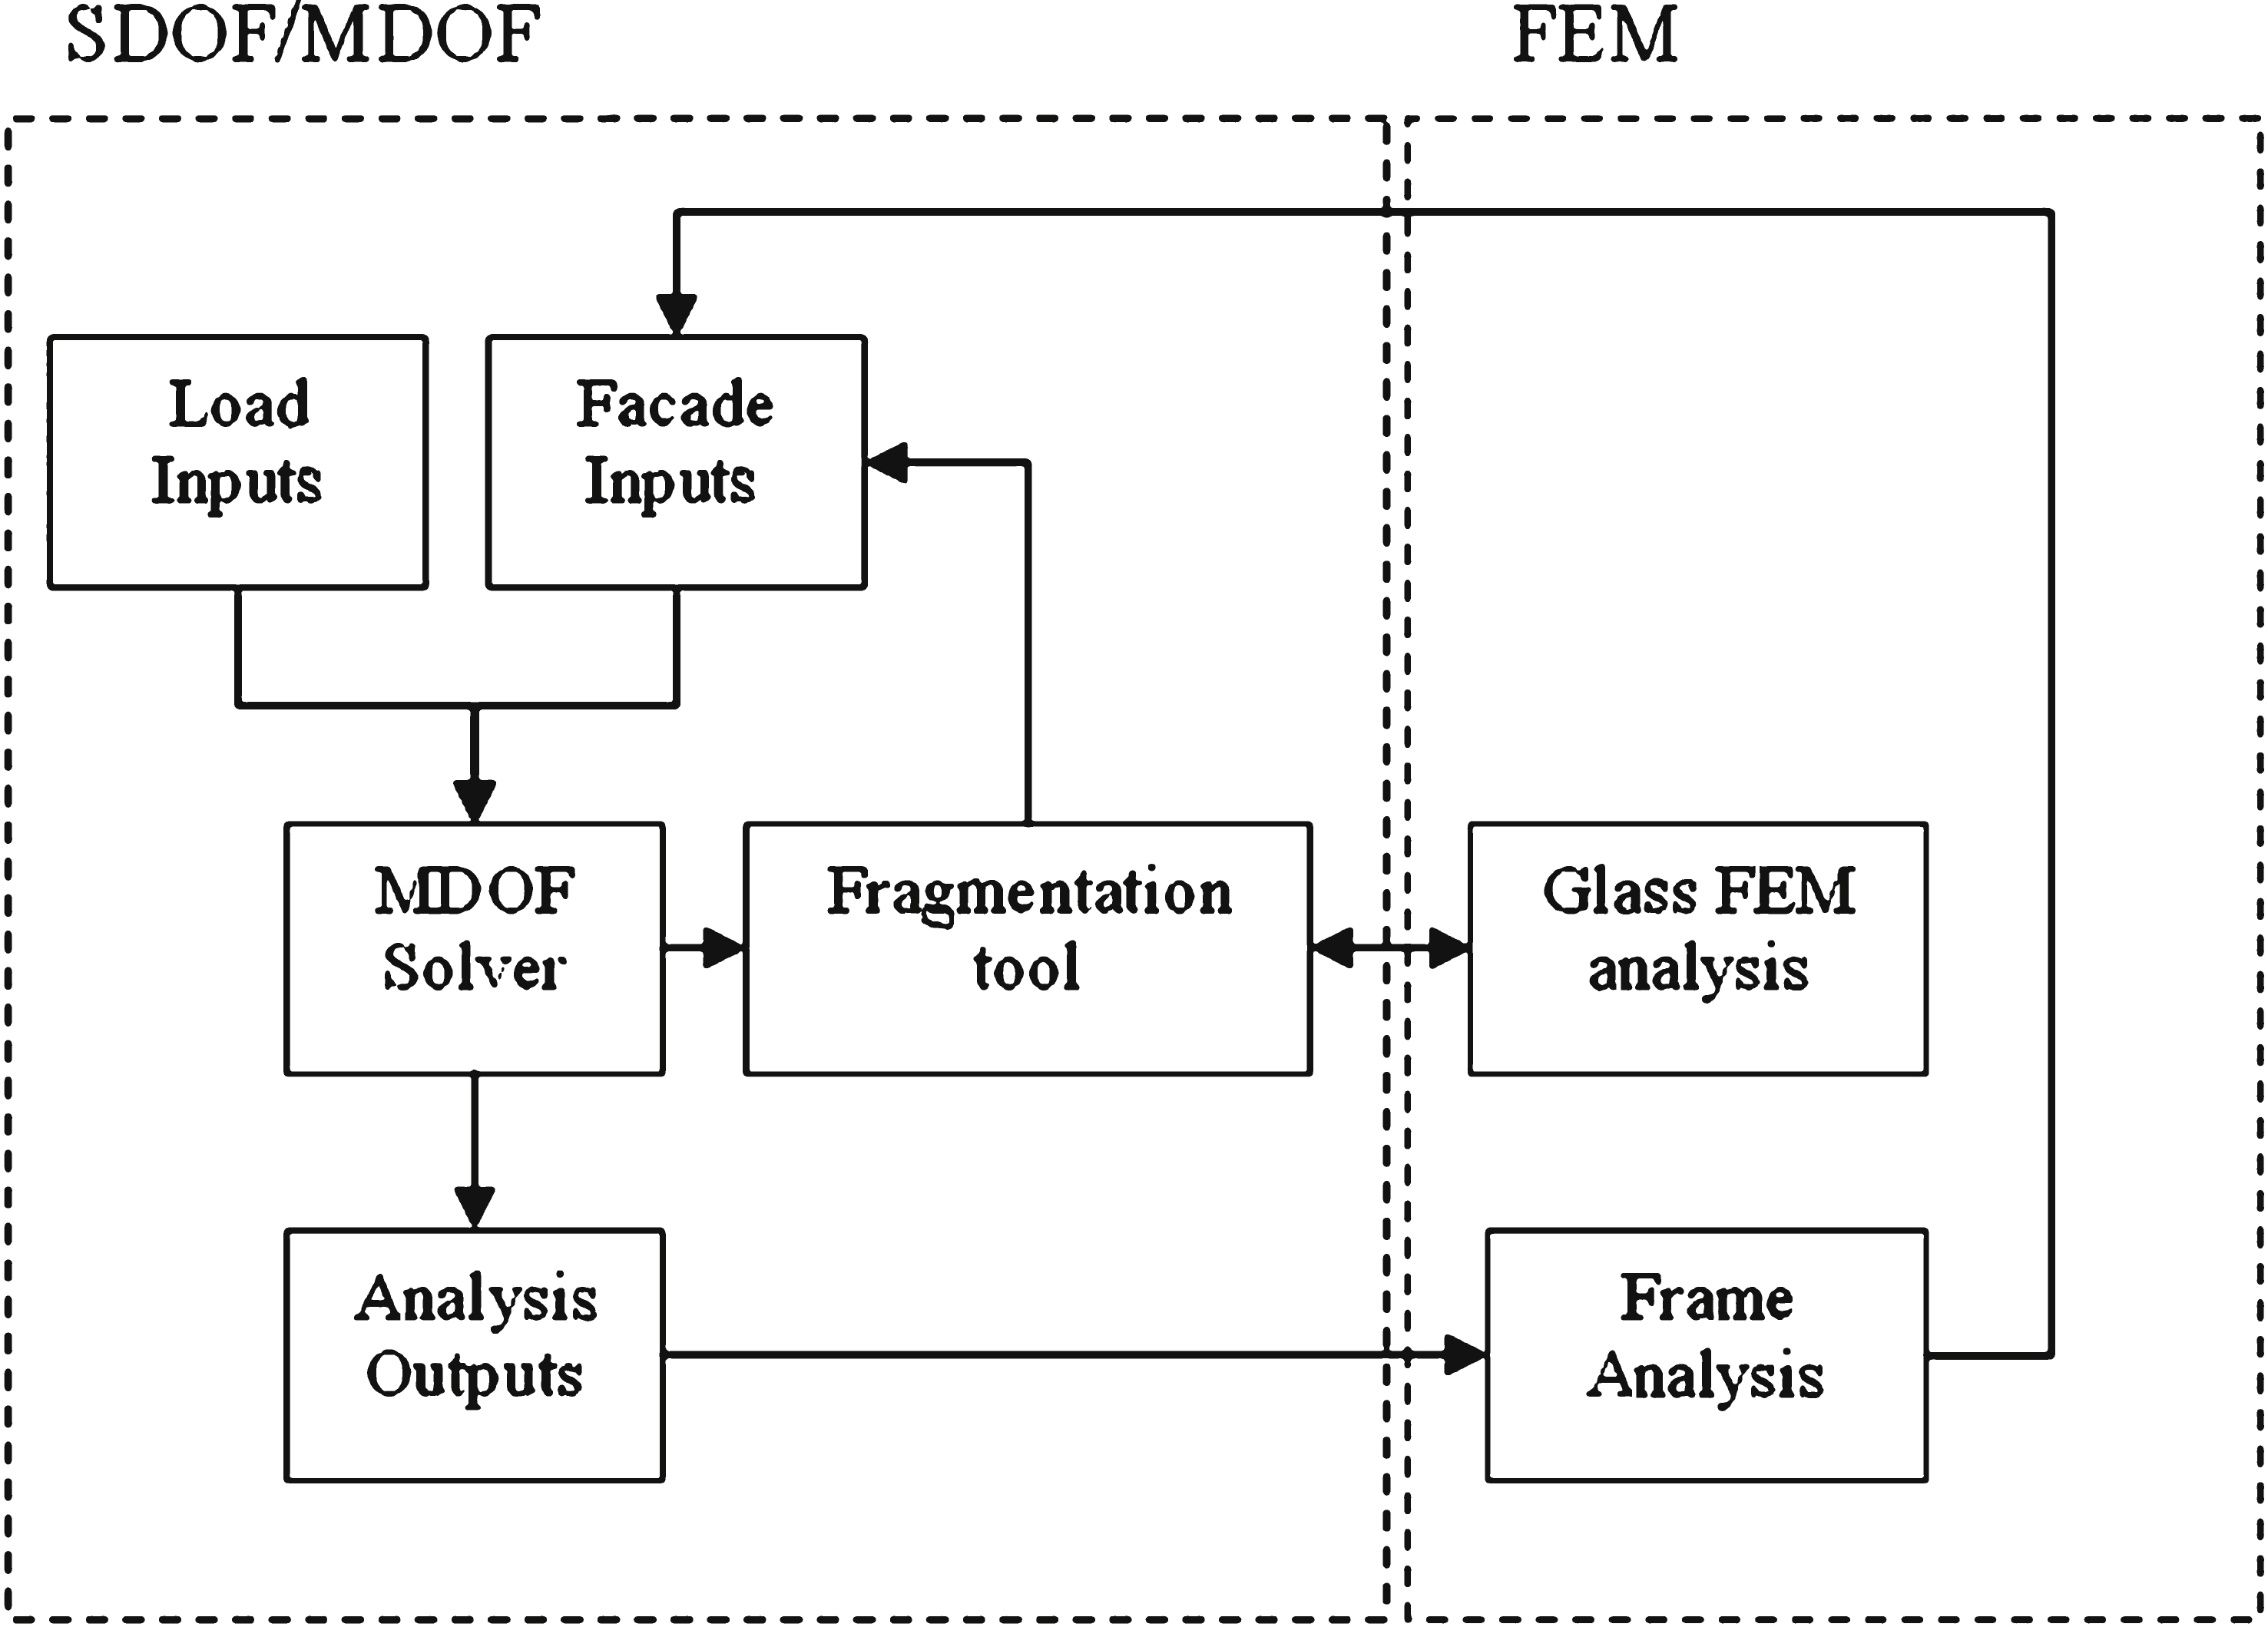 Schematic of the analysis process in TestudoTM.